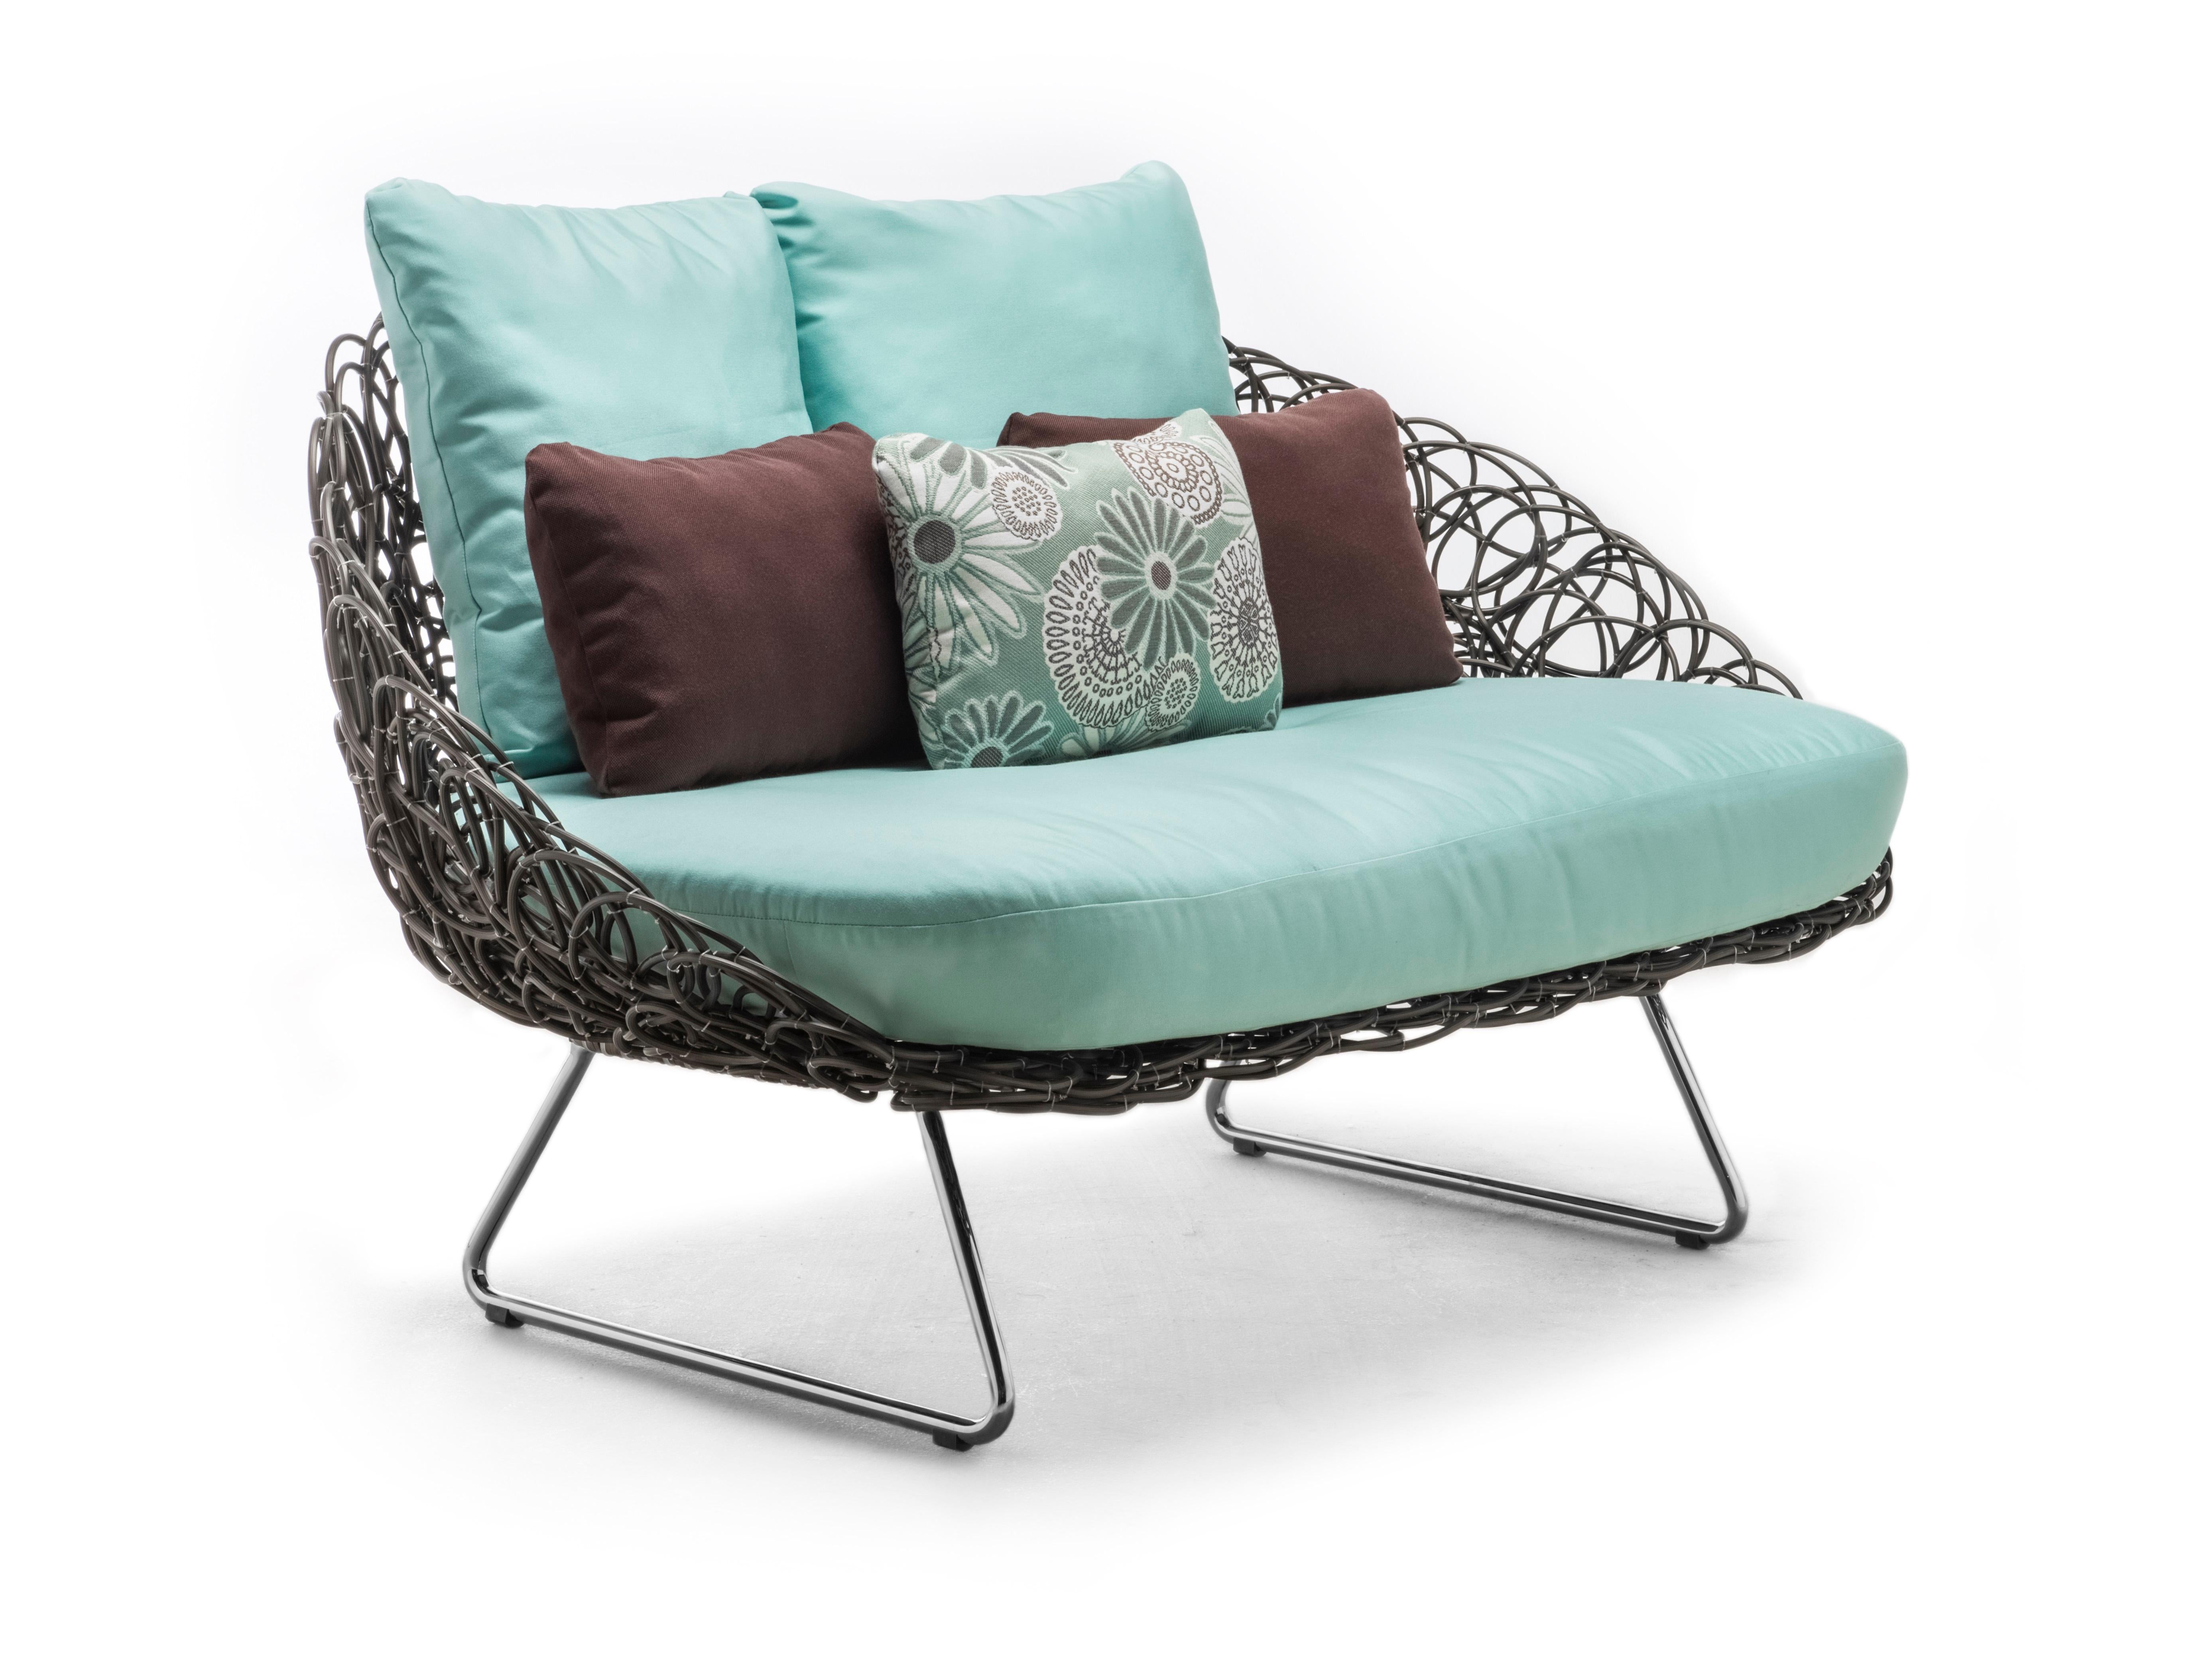 Indoor noodle loveseat by Kenneth Cobonpue.
Materials: Rattan, nylon, stainless steel, steel. 
Also available in other colors and for outdoors.
Dimensions: 96 cm x 153 cm x H 85 cm

Spontaneous and playful, Noodle celebrates serendipitous